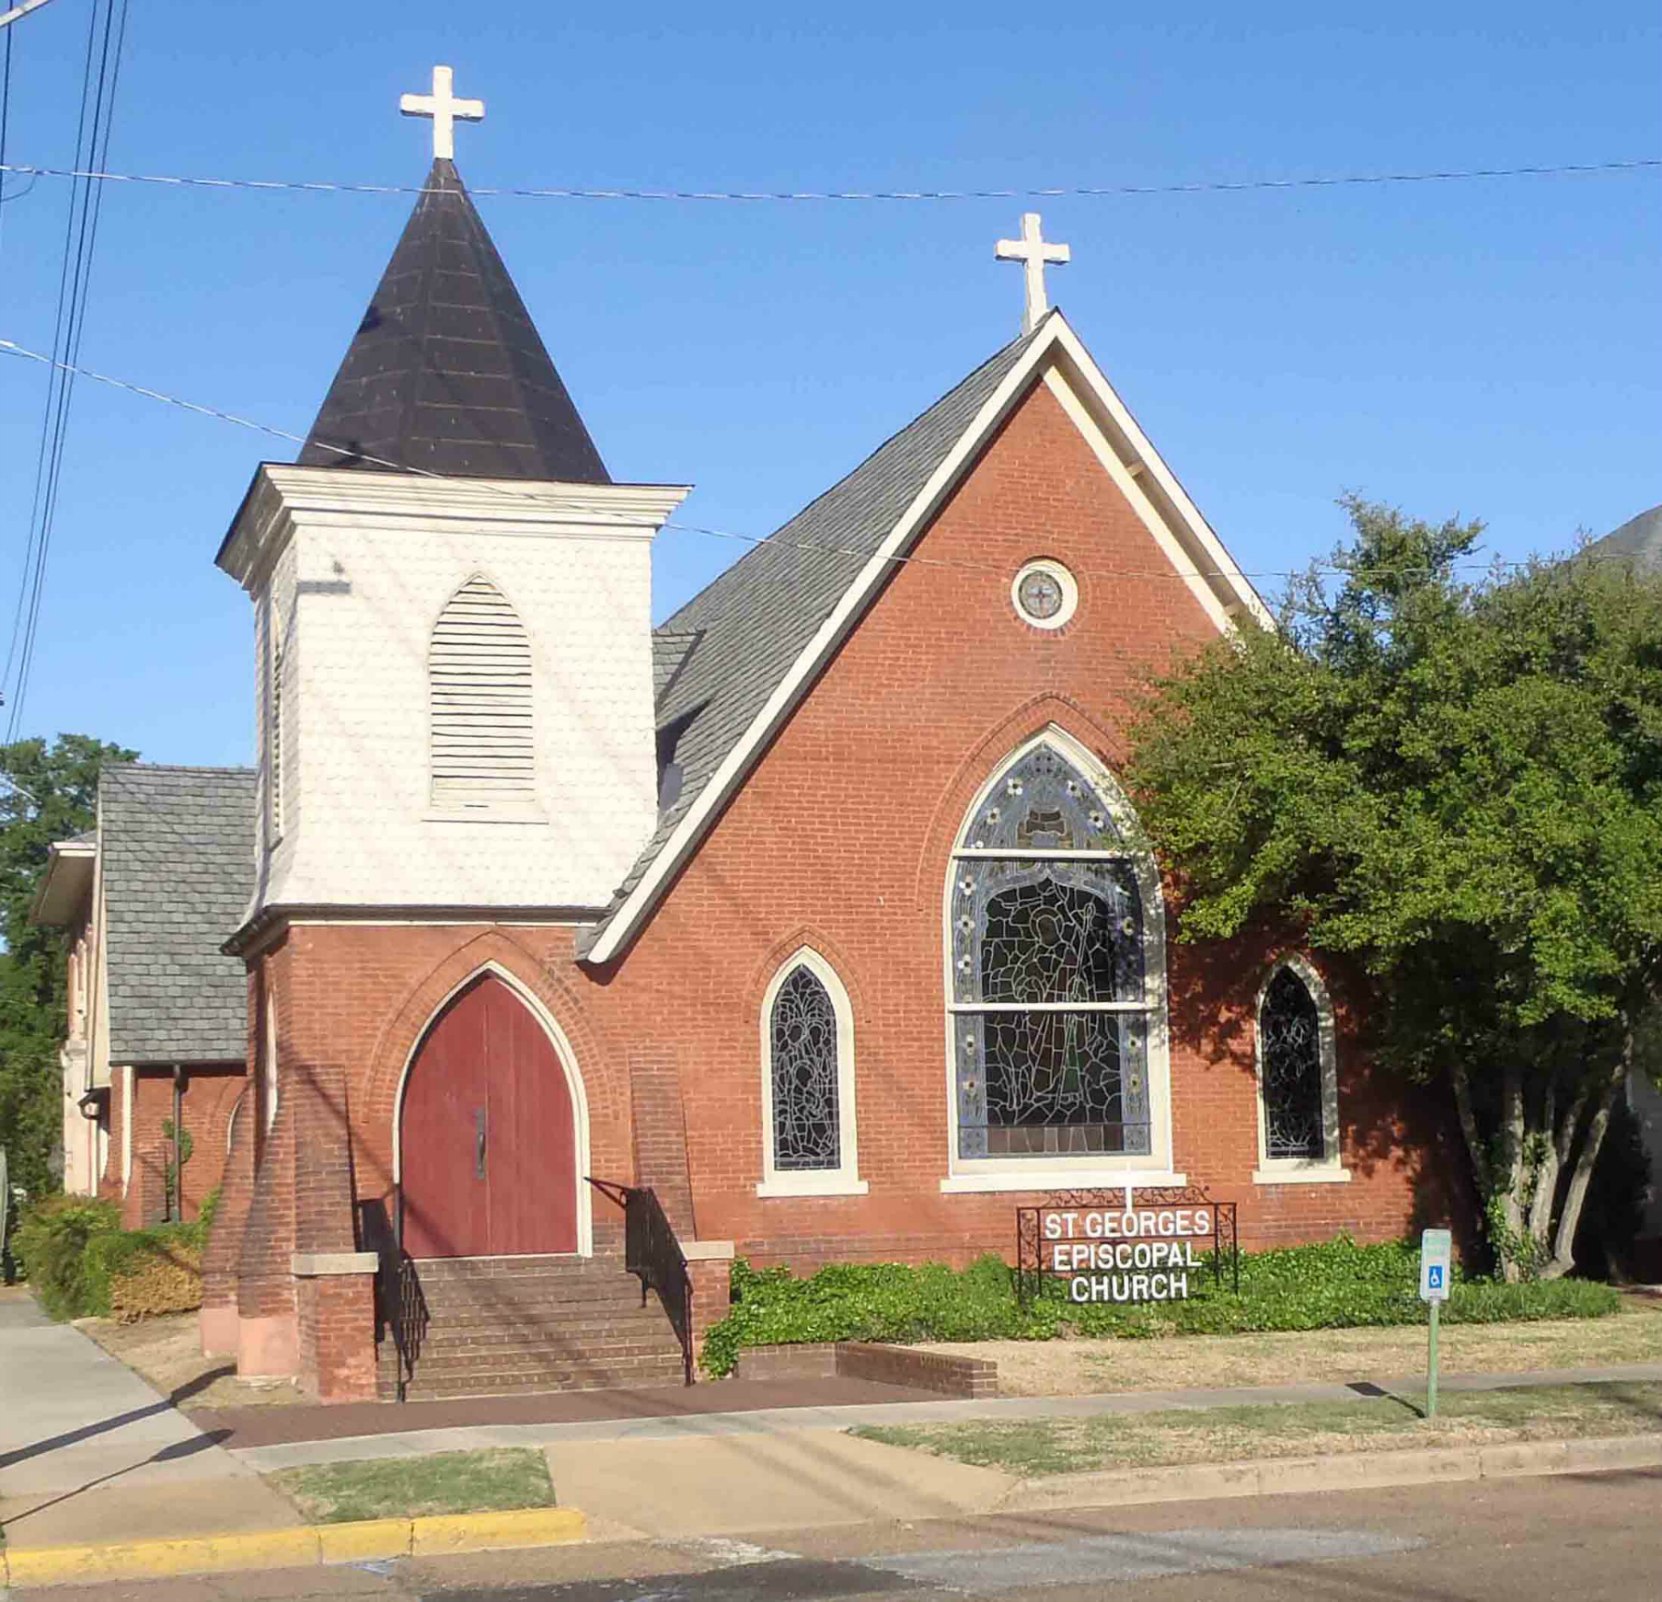 St. George's Episcopal Church, Clarksdale, Mississippi. Tennessee Williams' grandfather was Rector of this church.